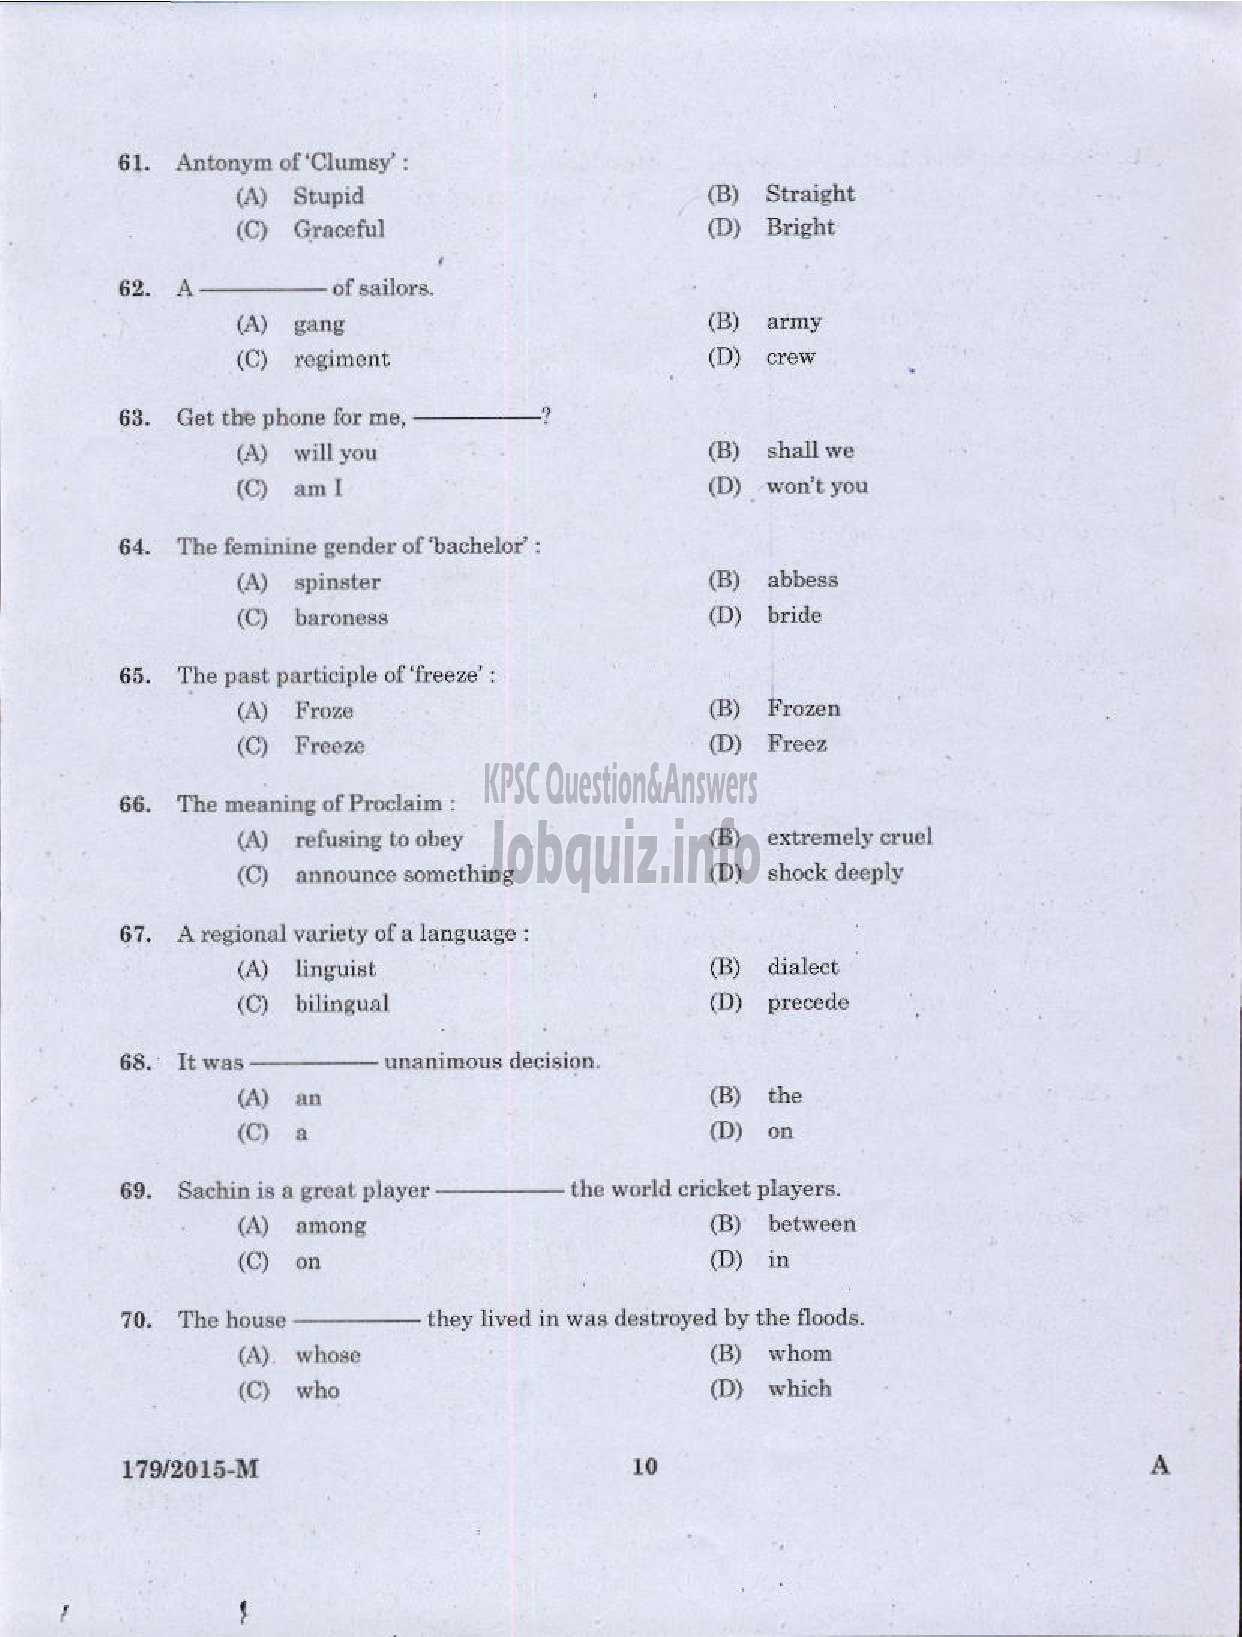 Kerala PSC Question Paper - POLICE CONSTABLE ARMED POLICE BATTALION POLICE/WOMEN POLICE CONSTABLE ARMED POLICE BATTALION POLICE ( Malayalam ) -8